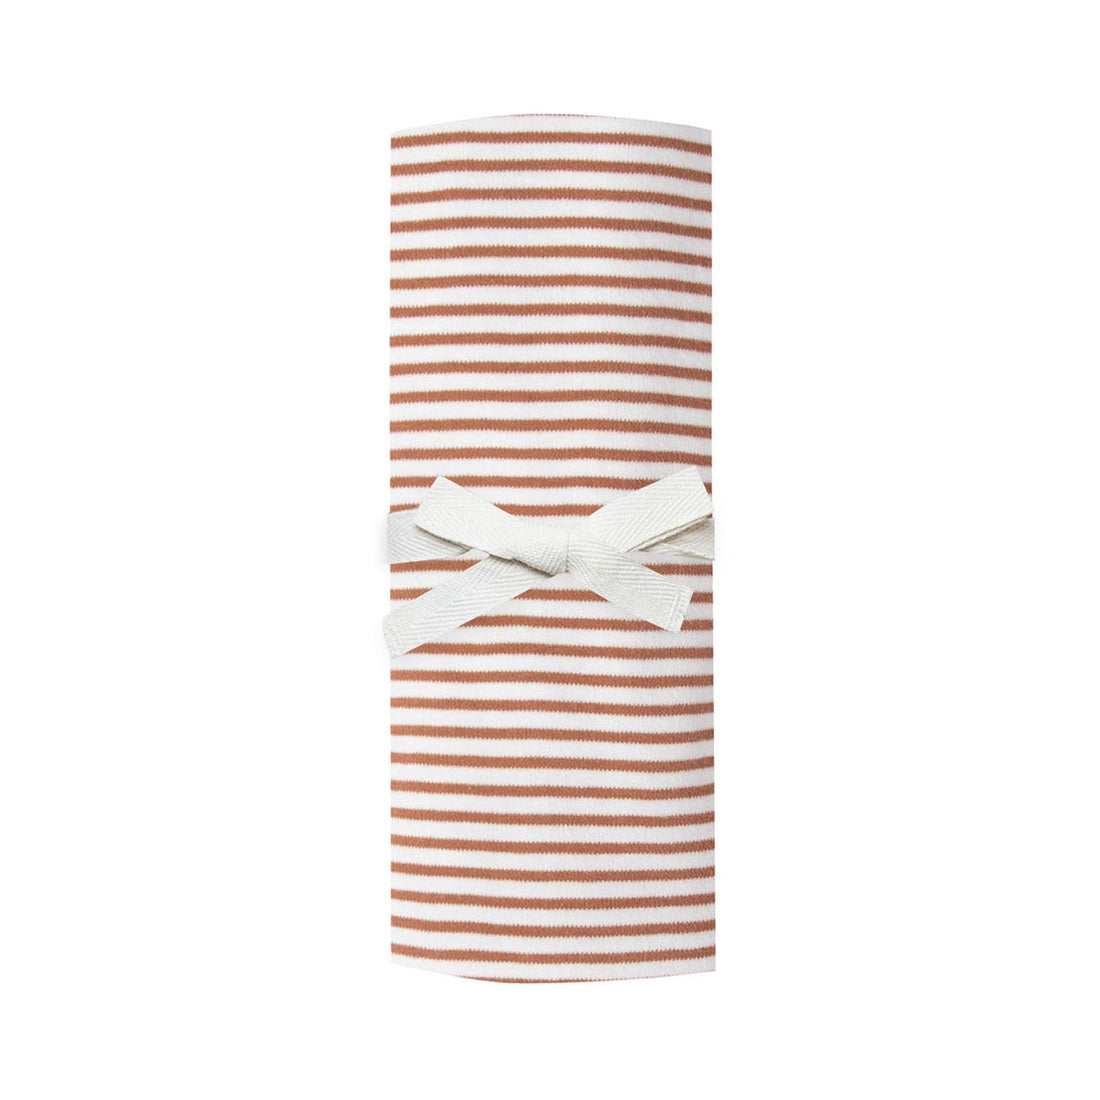 Quincy Mae Rust Stripe Baby Swaddle